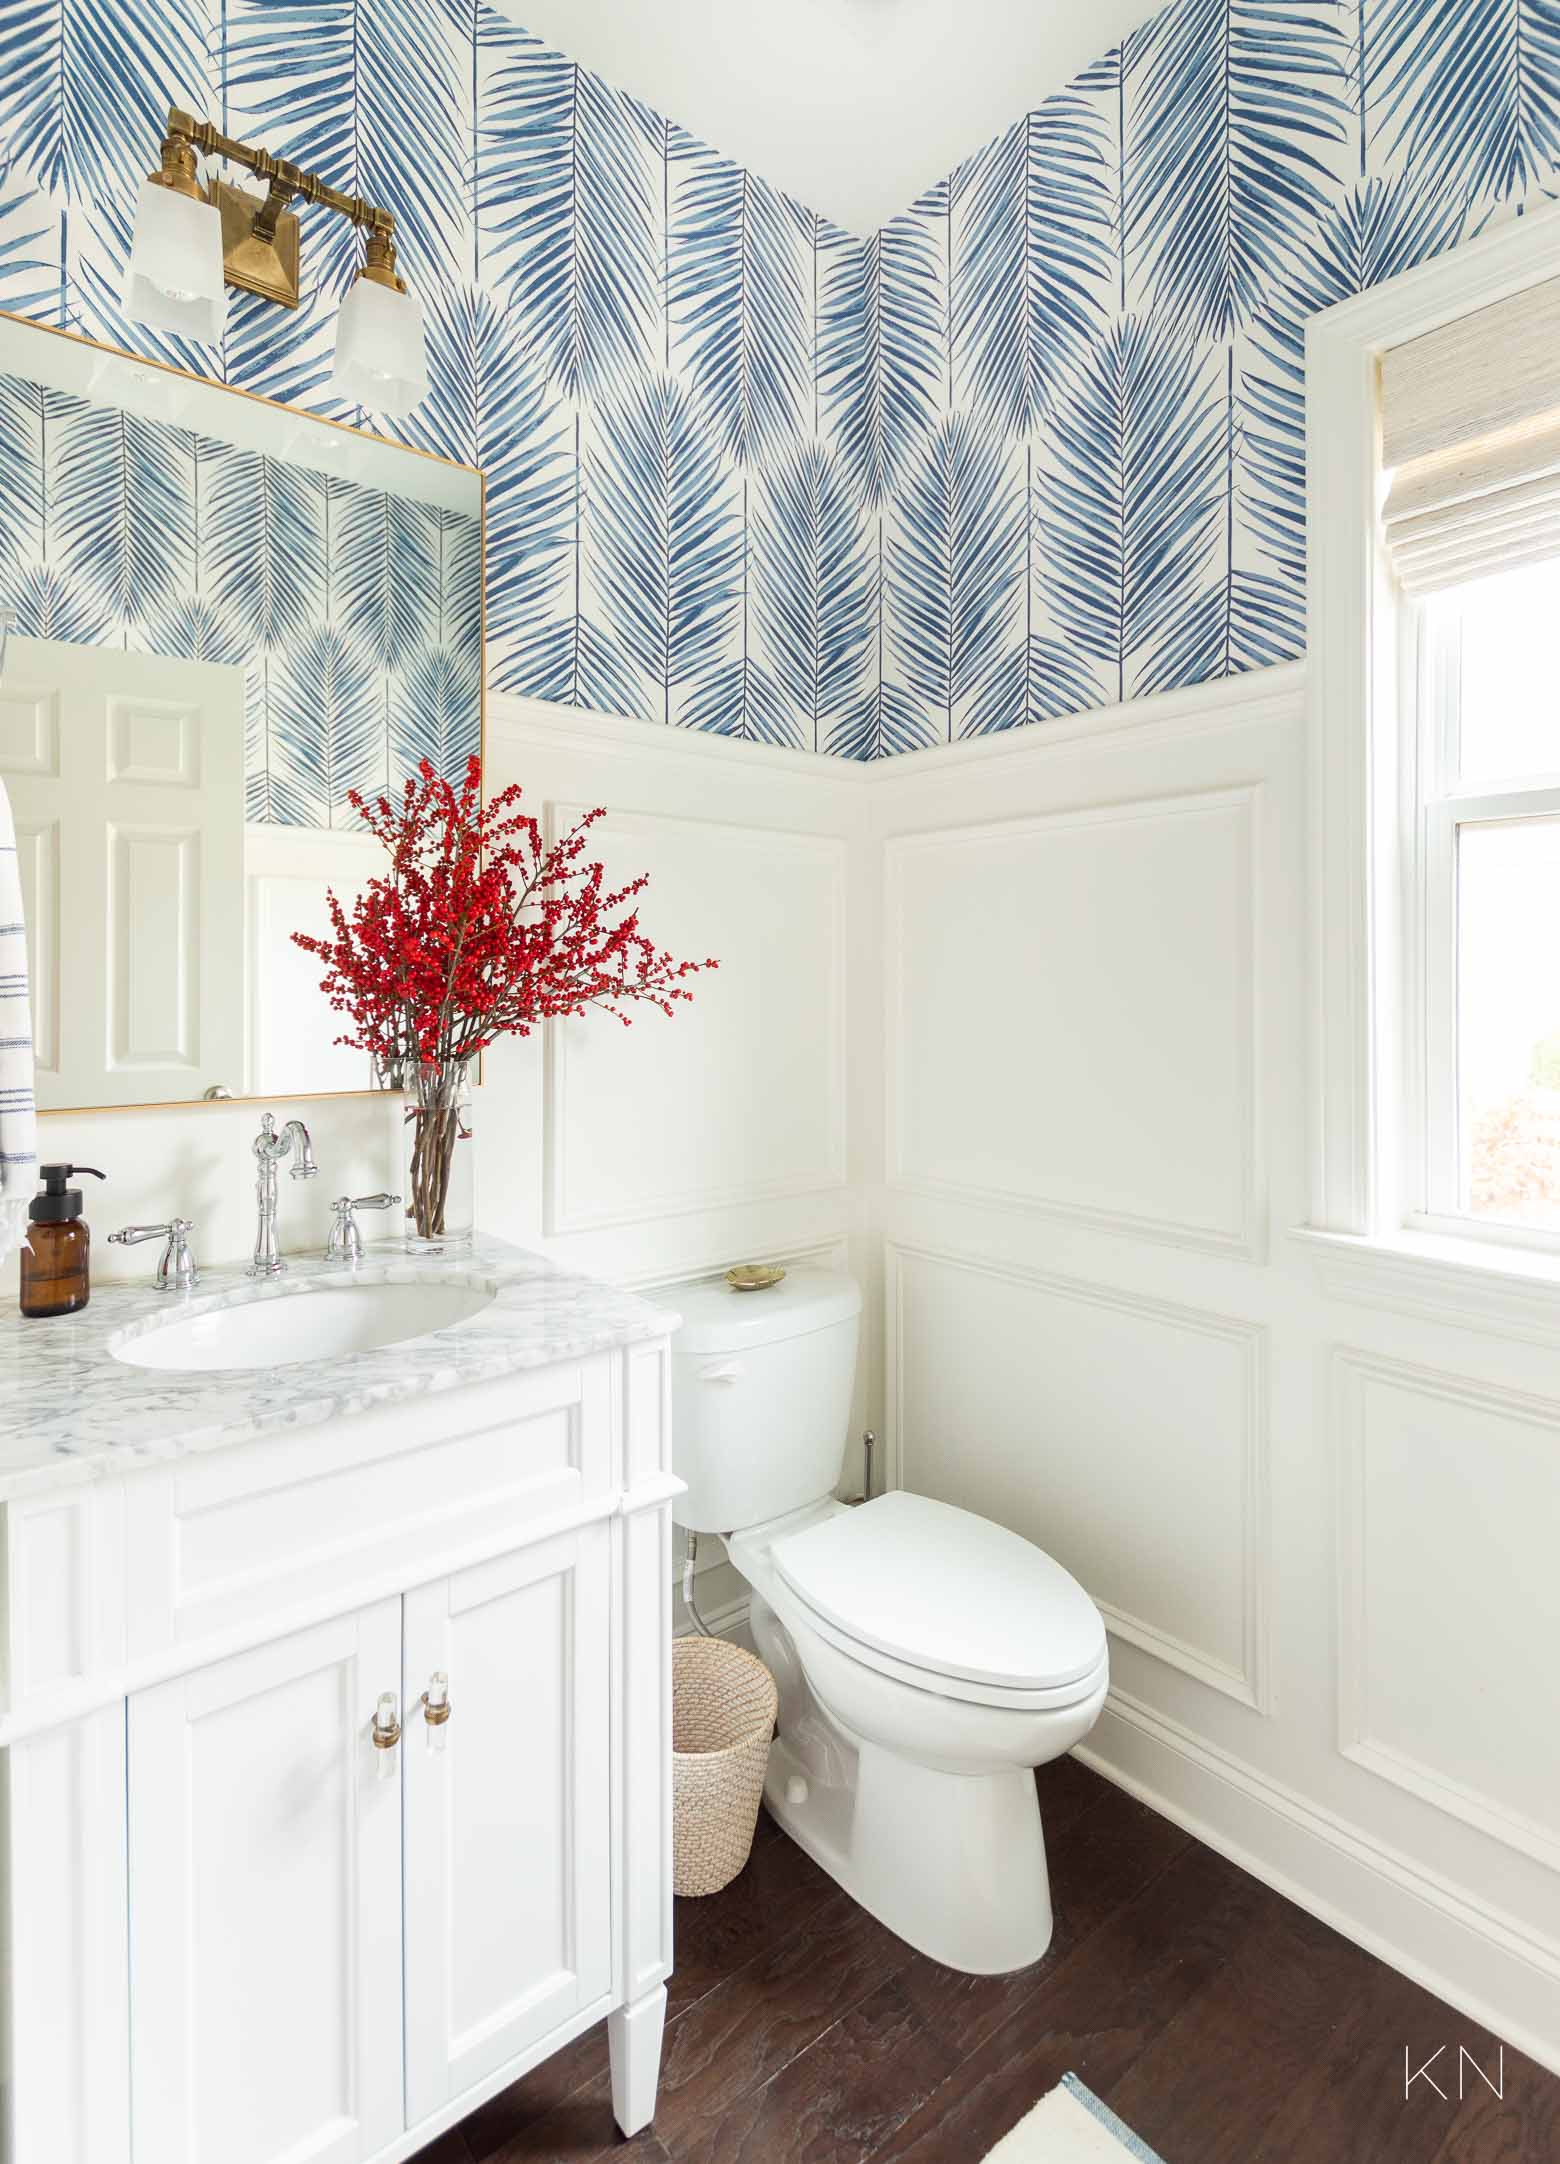 Fresh Christmas Decor -- Red Berry Branches in Powder Room with Blue and White Wallpaper